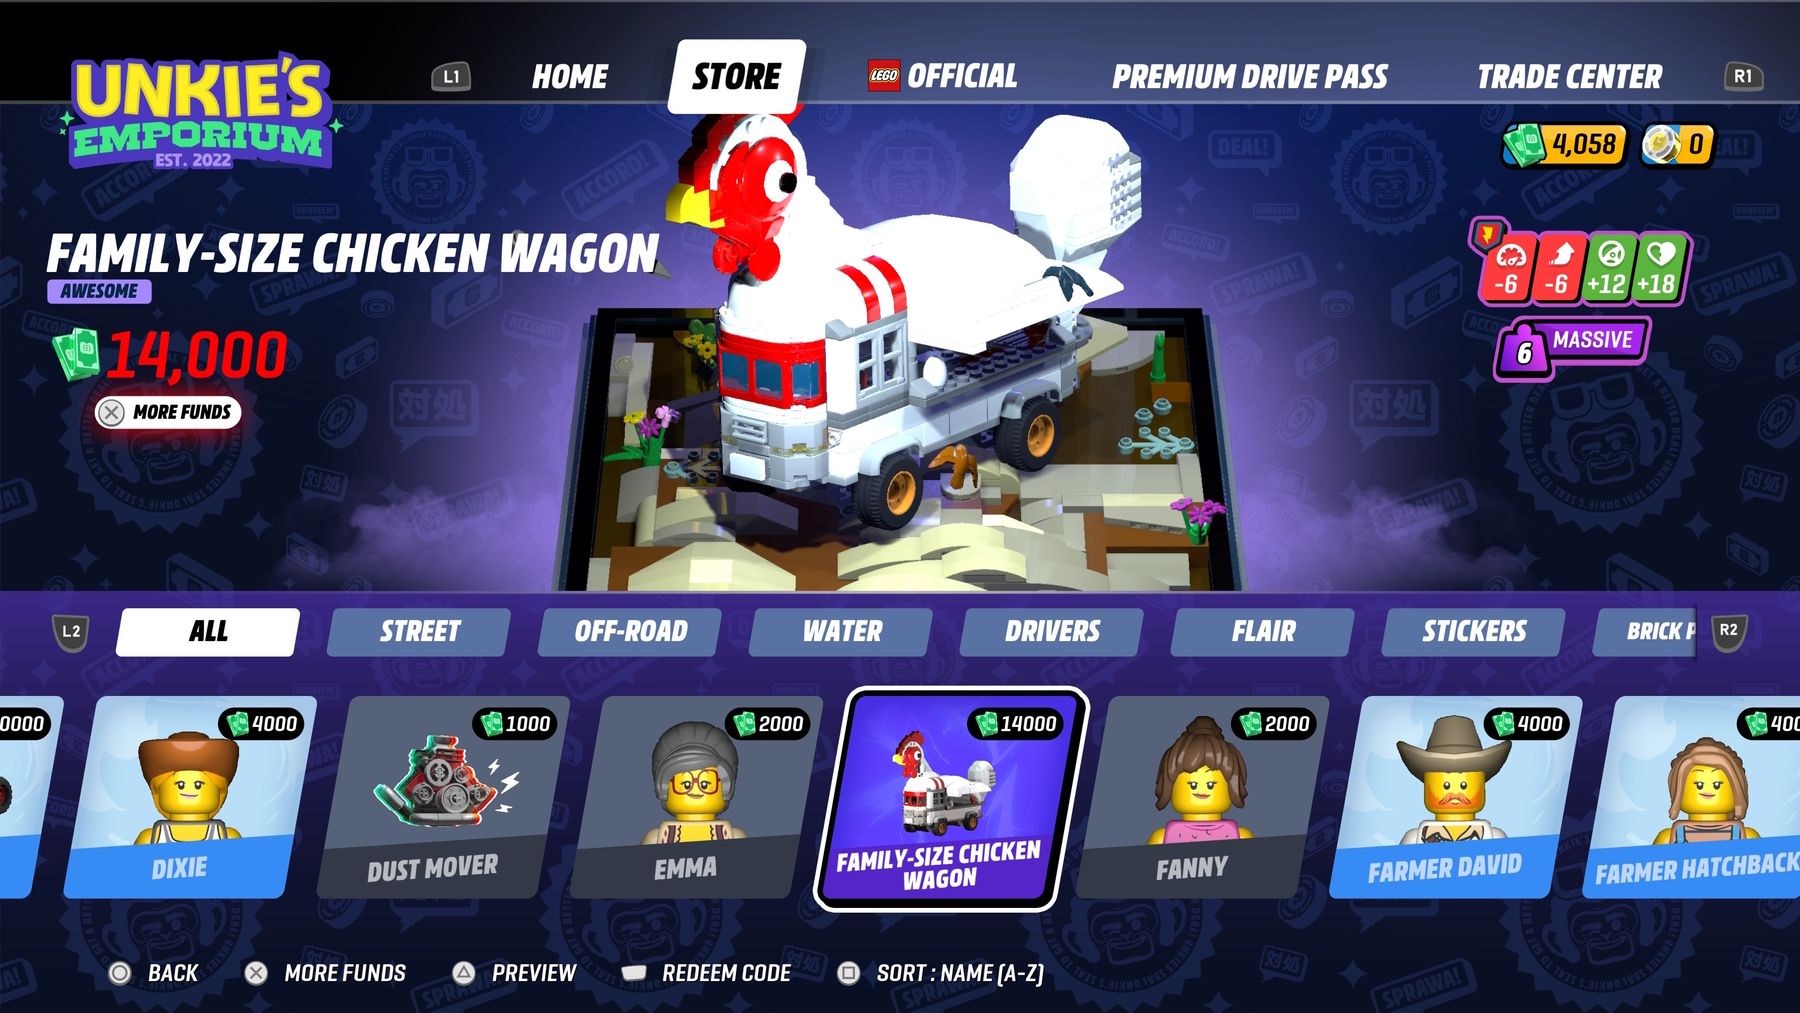 LEGO 2K Drive Microtransations Store In Unkie's Emporium - image showing the Family-Size Chicken Wagon that can be purchased for 14,000 in-game bucks